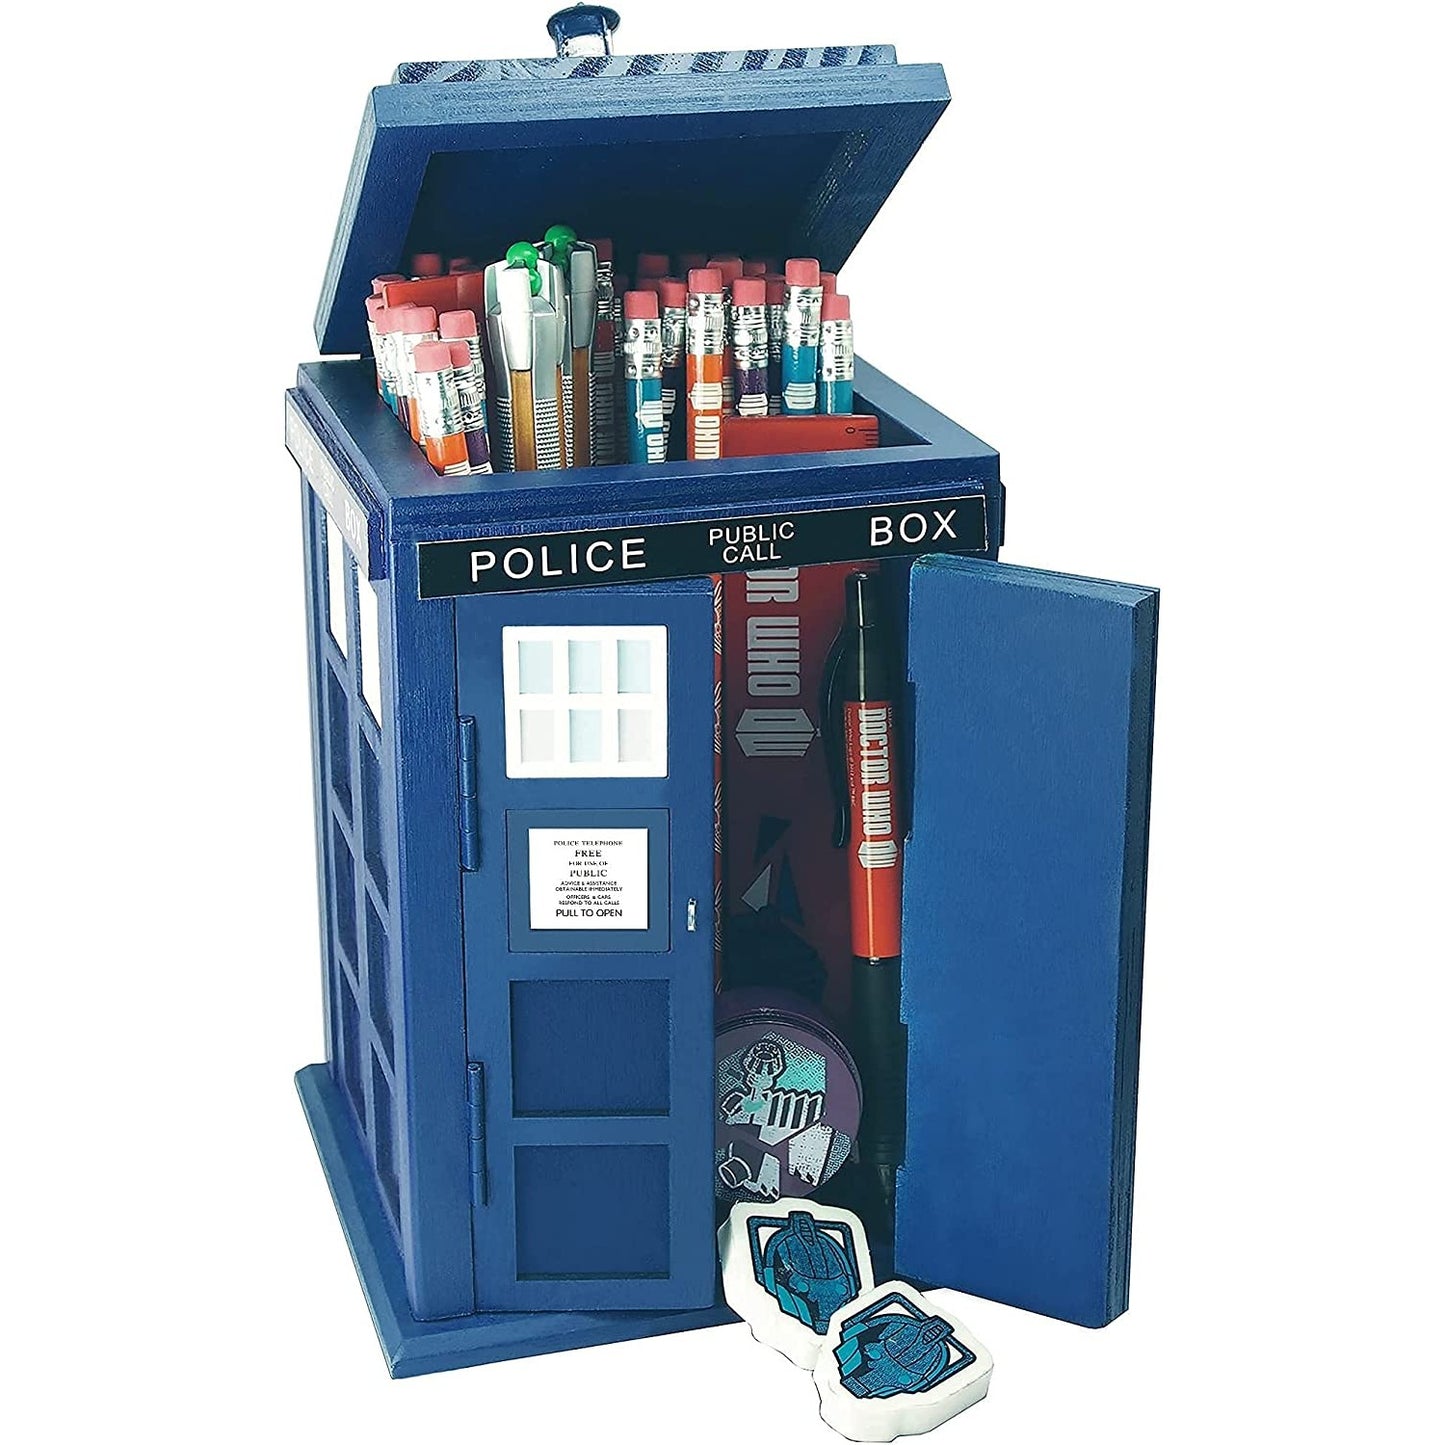 A storage container which is shaped like the Tardis from the TV show Doctor Who. There are a number of pencils and other stationary items inside the Tardis.